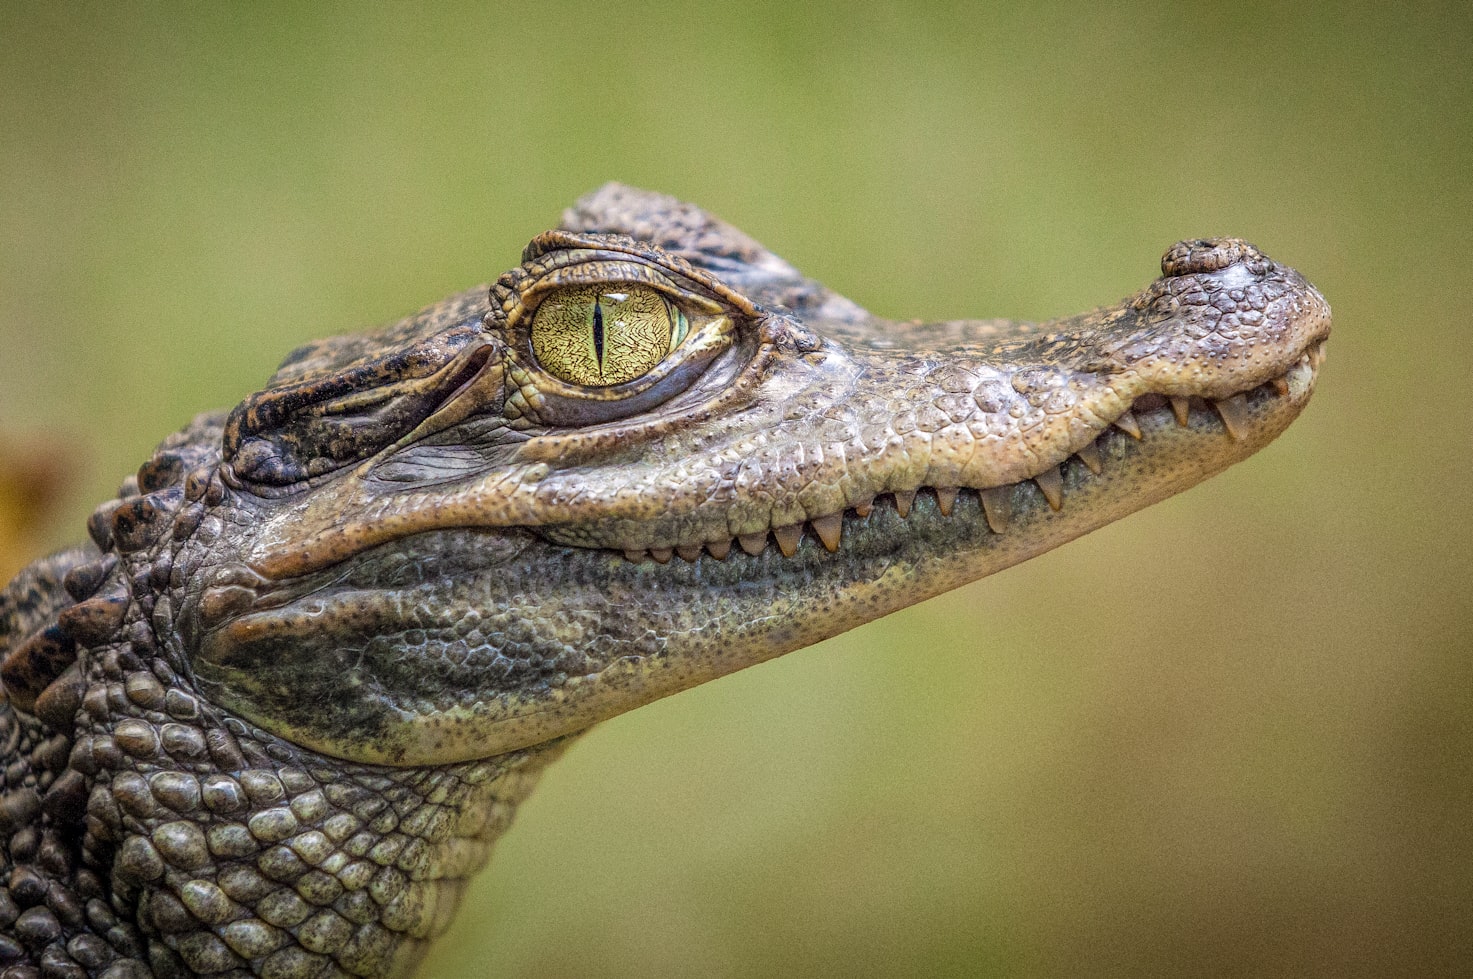 Baby alligator looking to the side with eyes wide